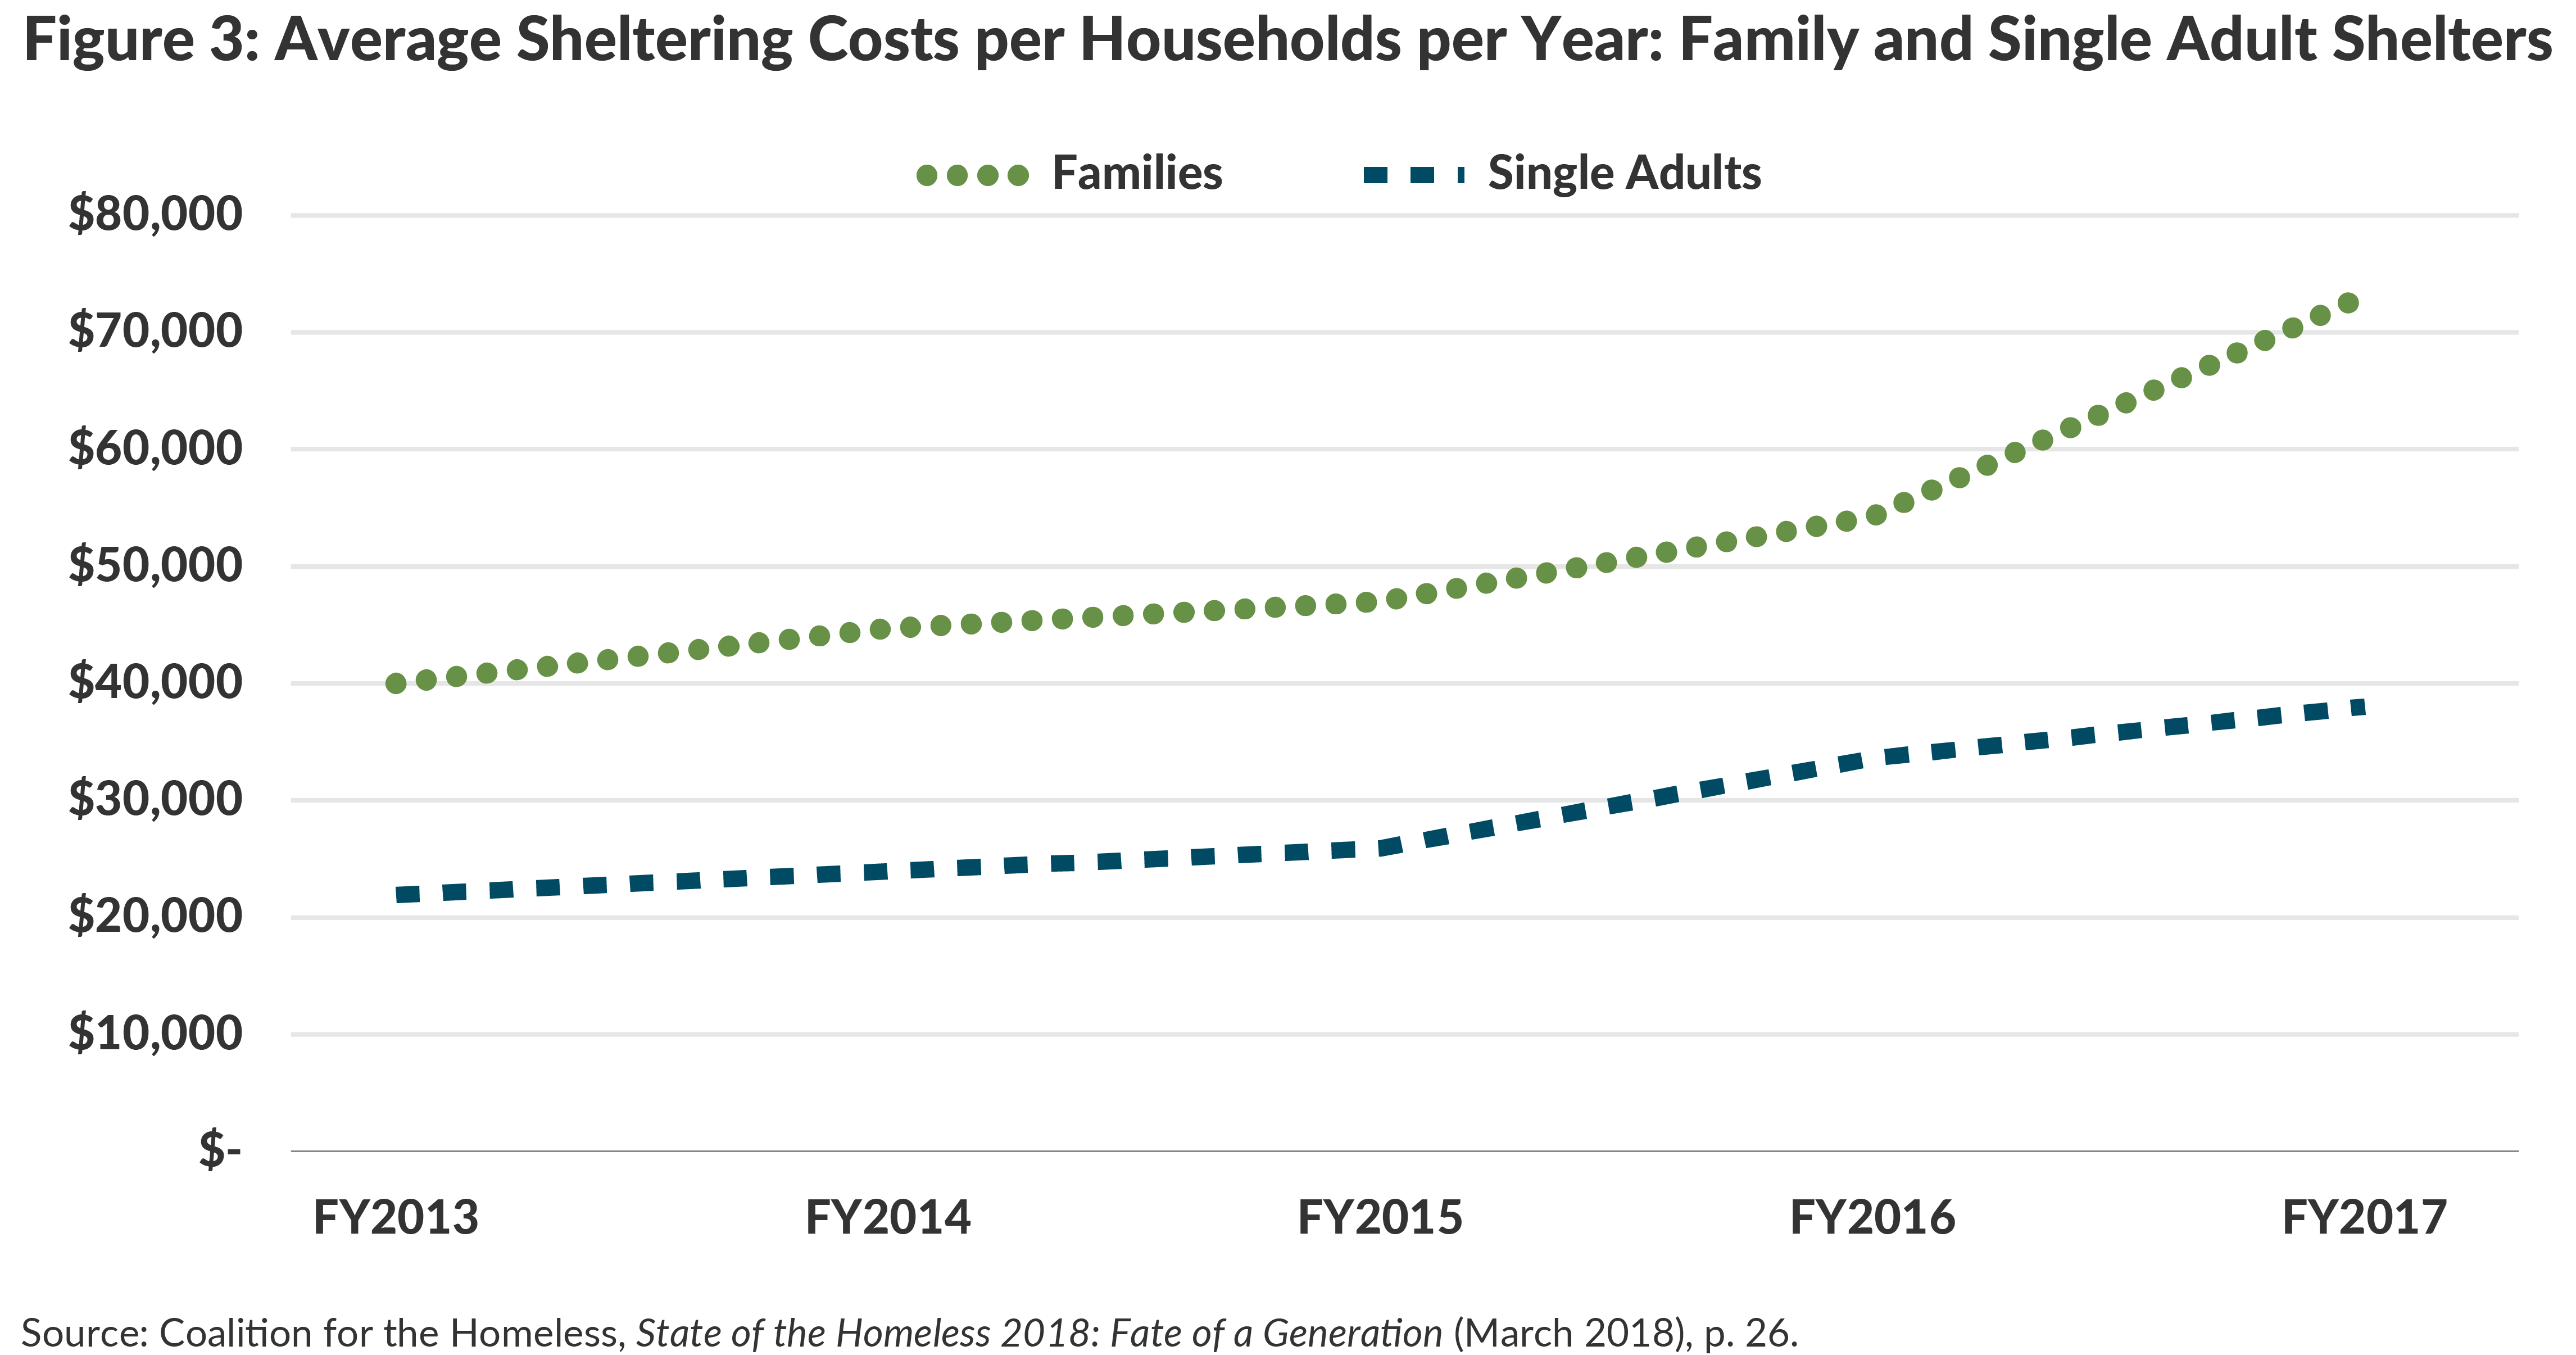 Figure 3: Average Sheltering Costs per Households per Year: Family and Single Adult Shelters